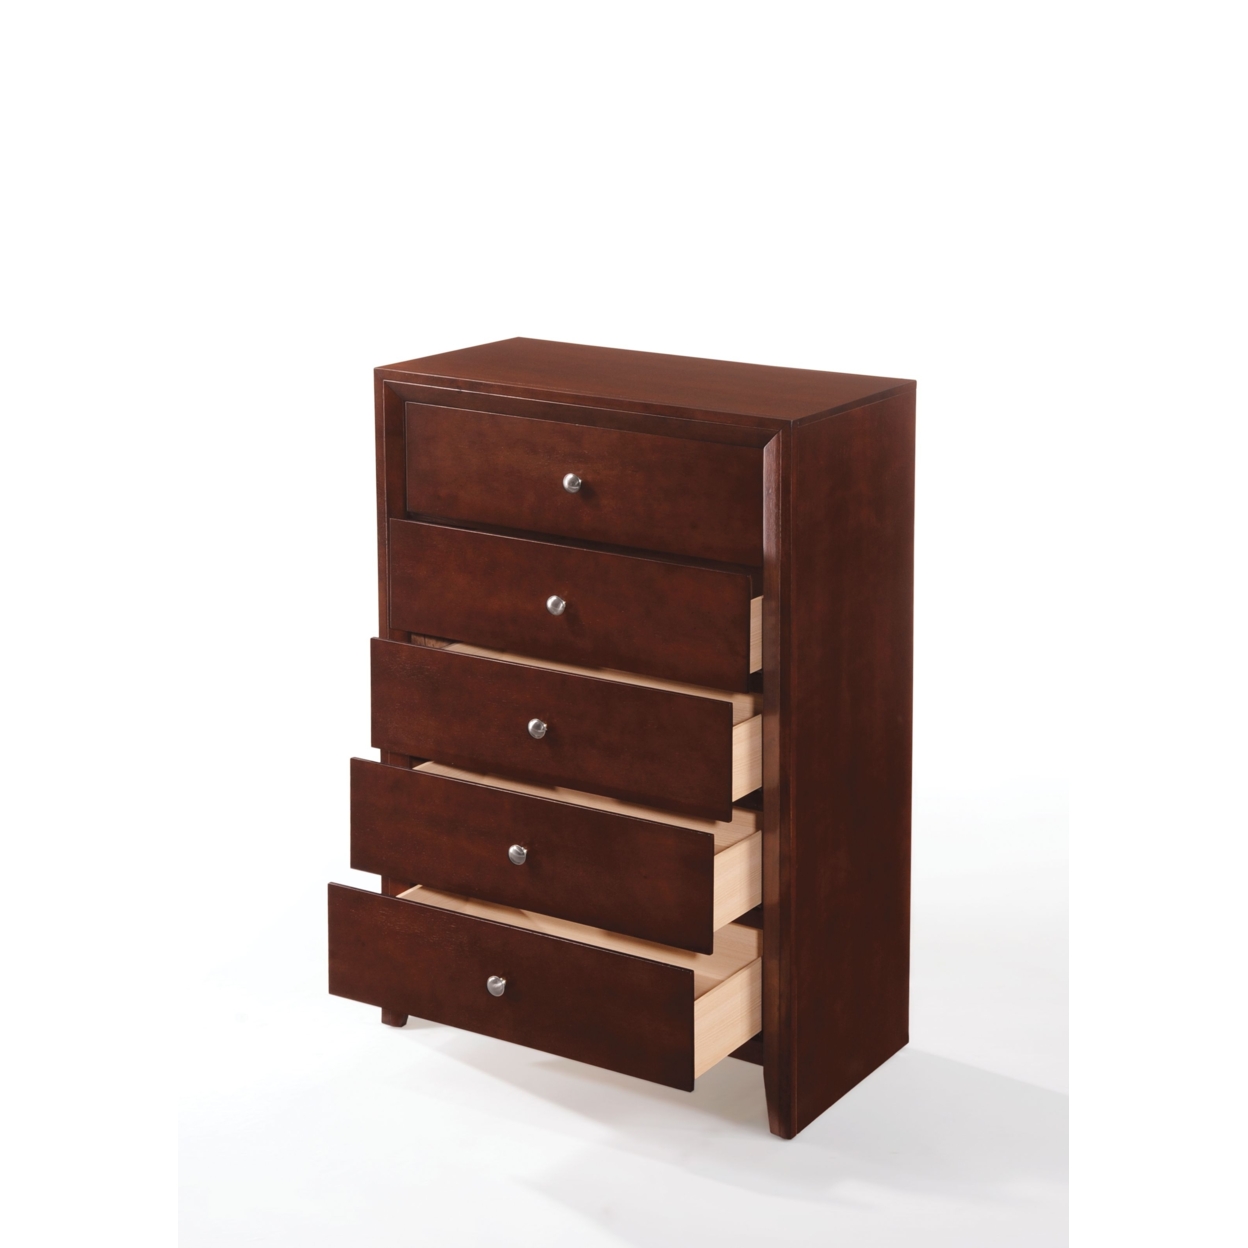 Contemporary Style Wooden Chest With 5 Storage Drawers, Brown- Saltoro Sherpi